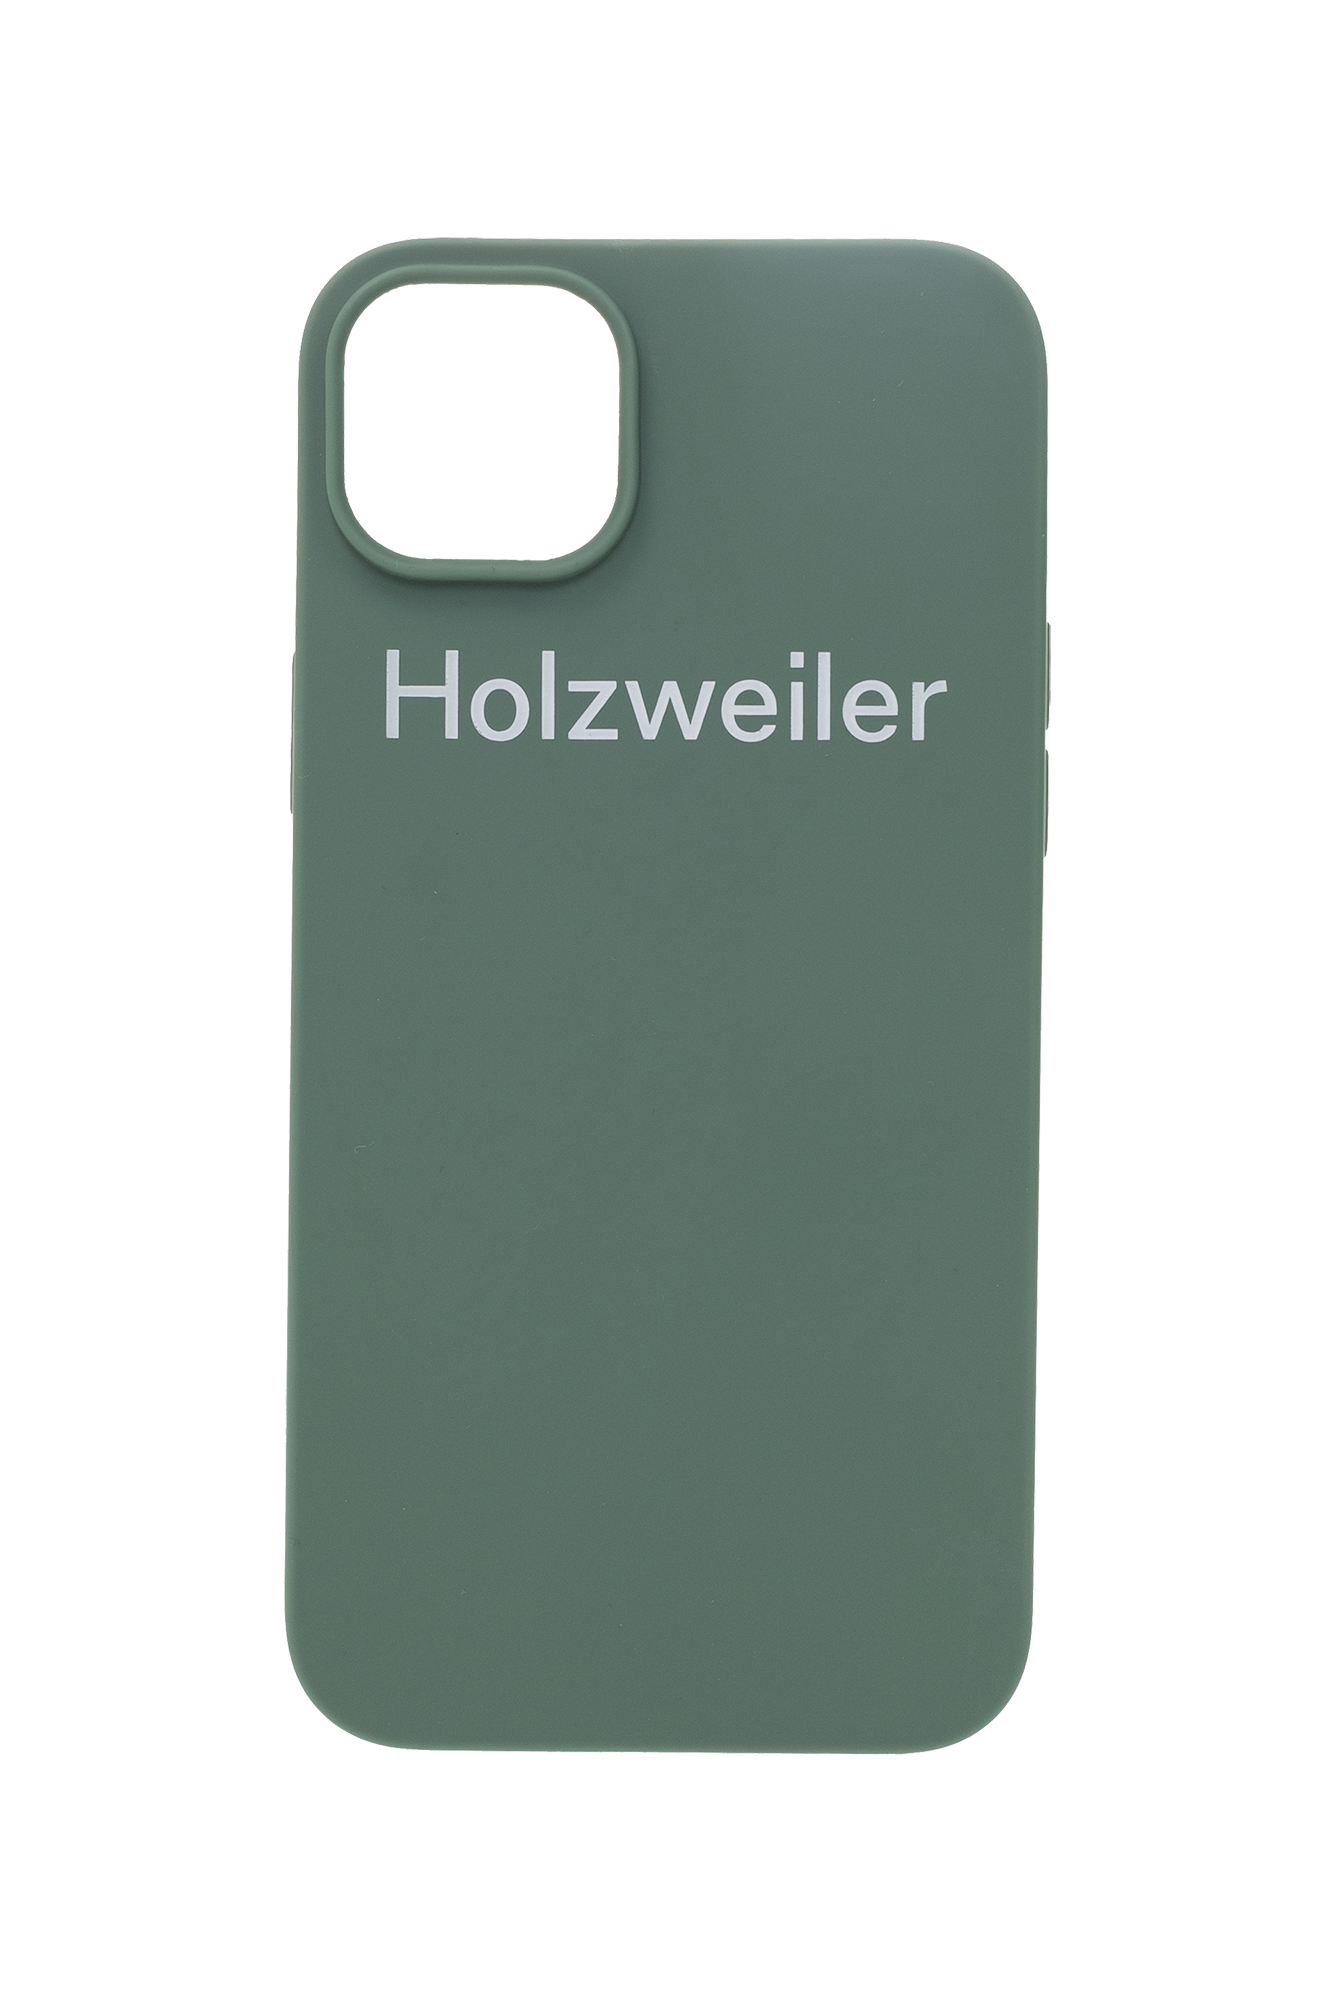 Holzweiler If the table does not fit on your screen, you can scroll to the right